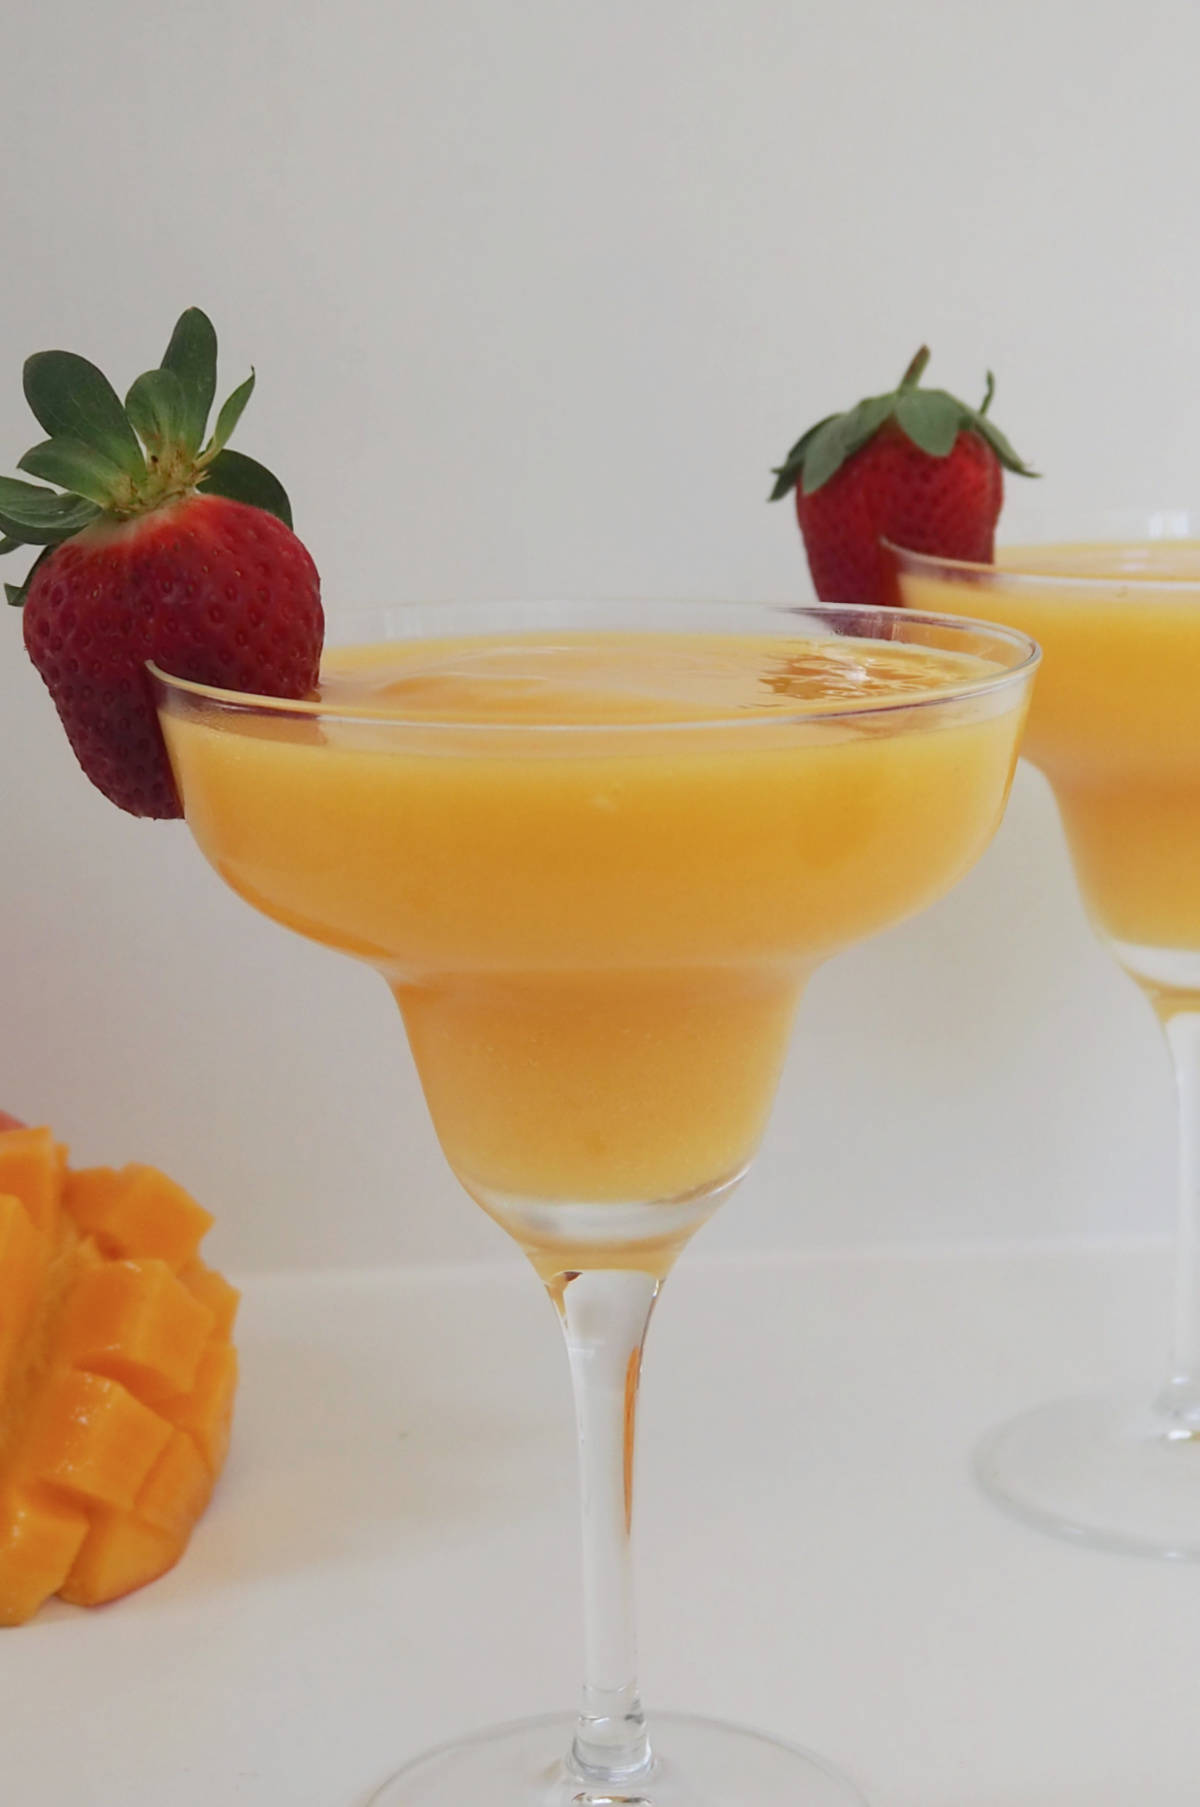 Mango Daiquiri in a cocktail glass and with a strawberry on the rim. In the background is a cut fresh Mango.